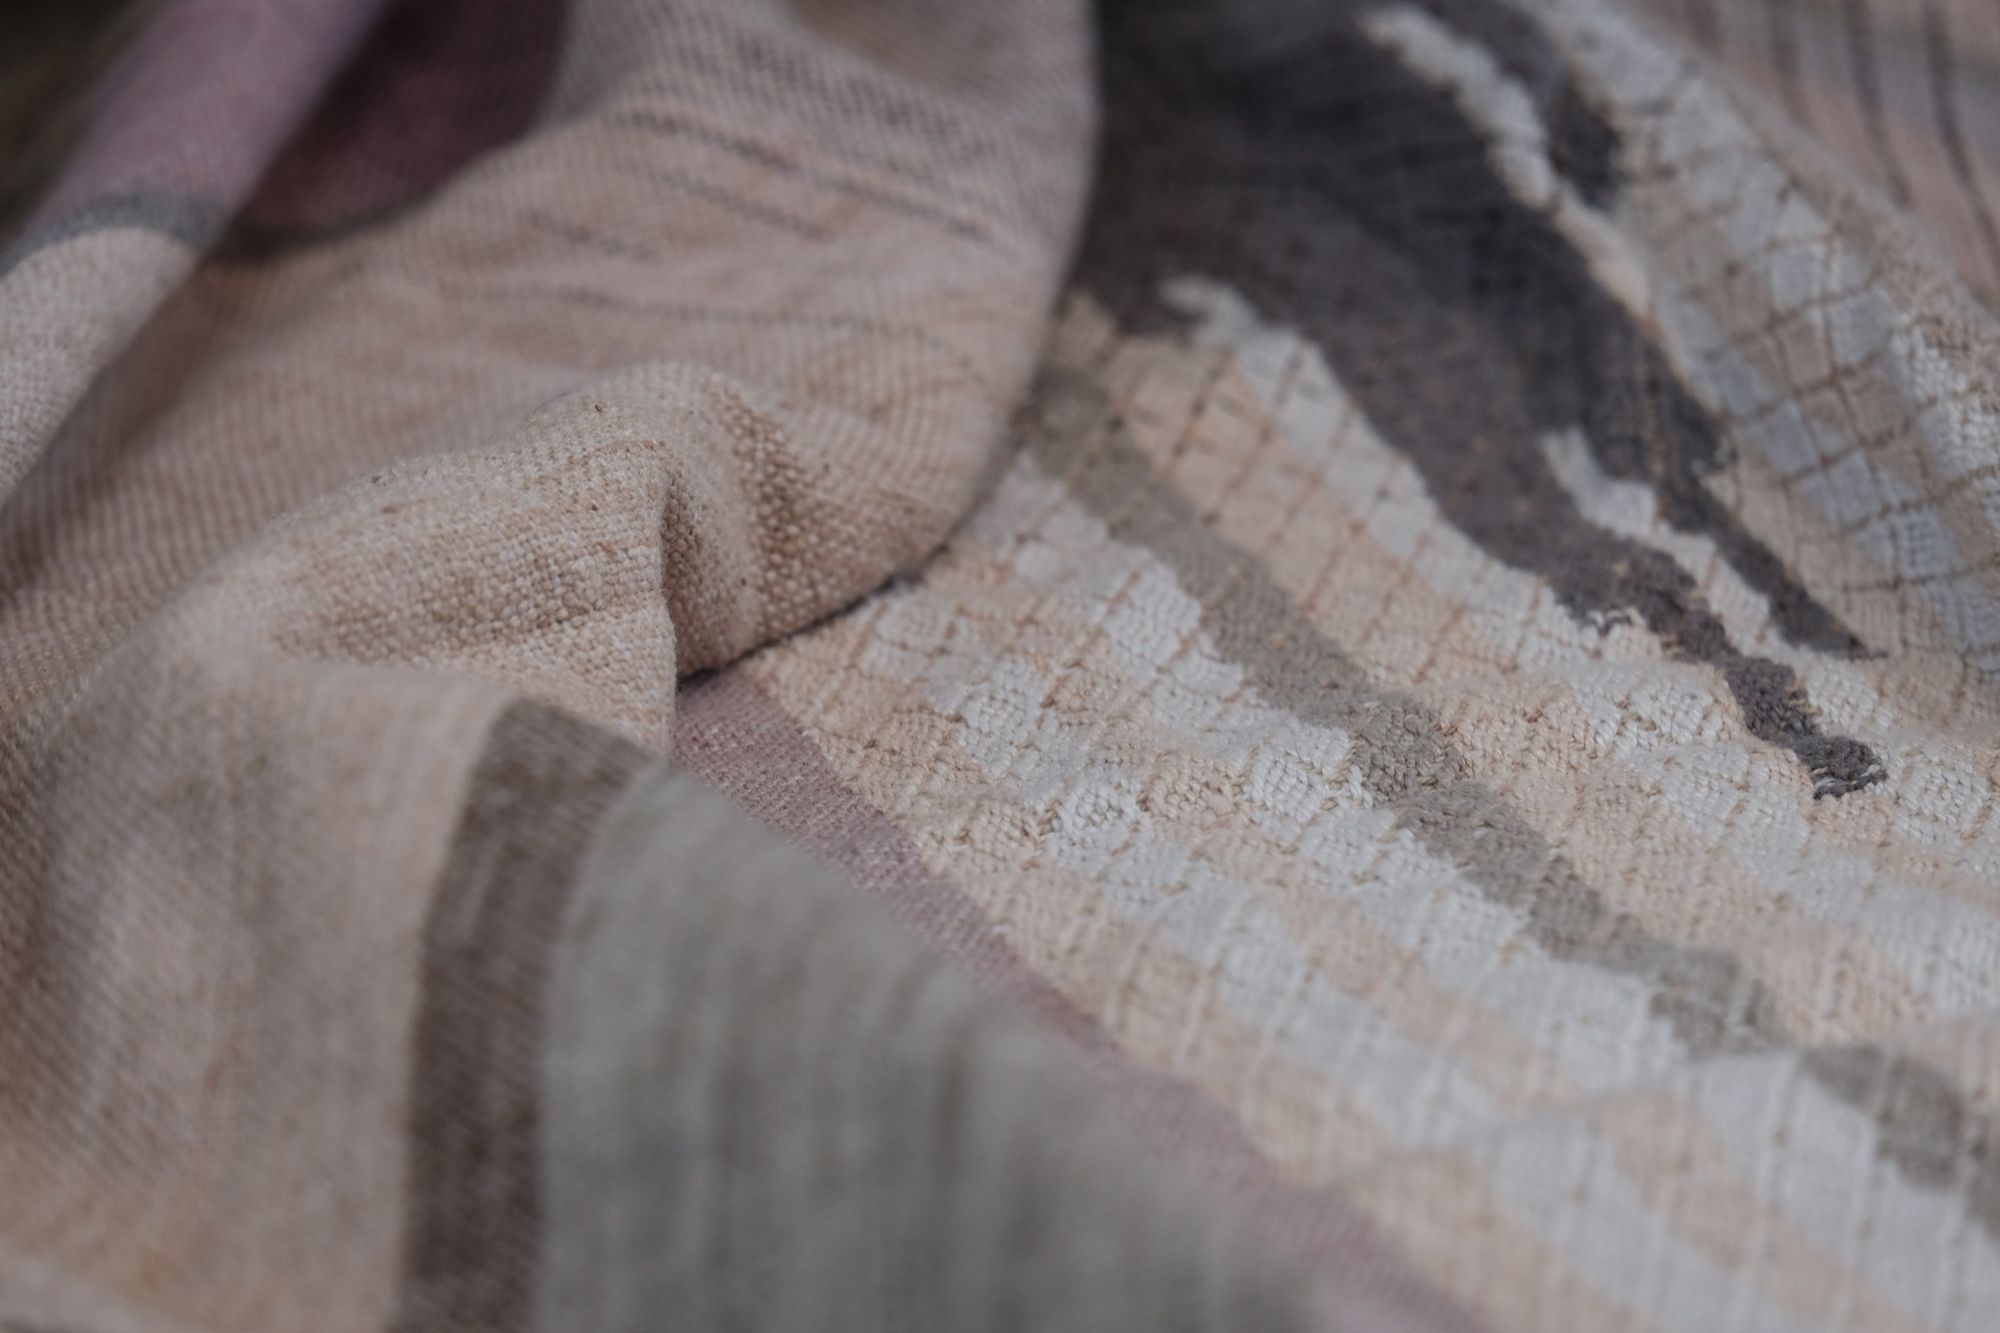 handwoven fabric of Naturally dyed subtle rainbow hues with a diamond texture pattern lays on a wooden floor